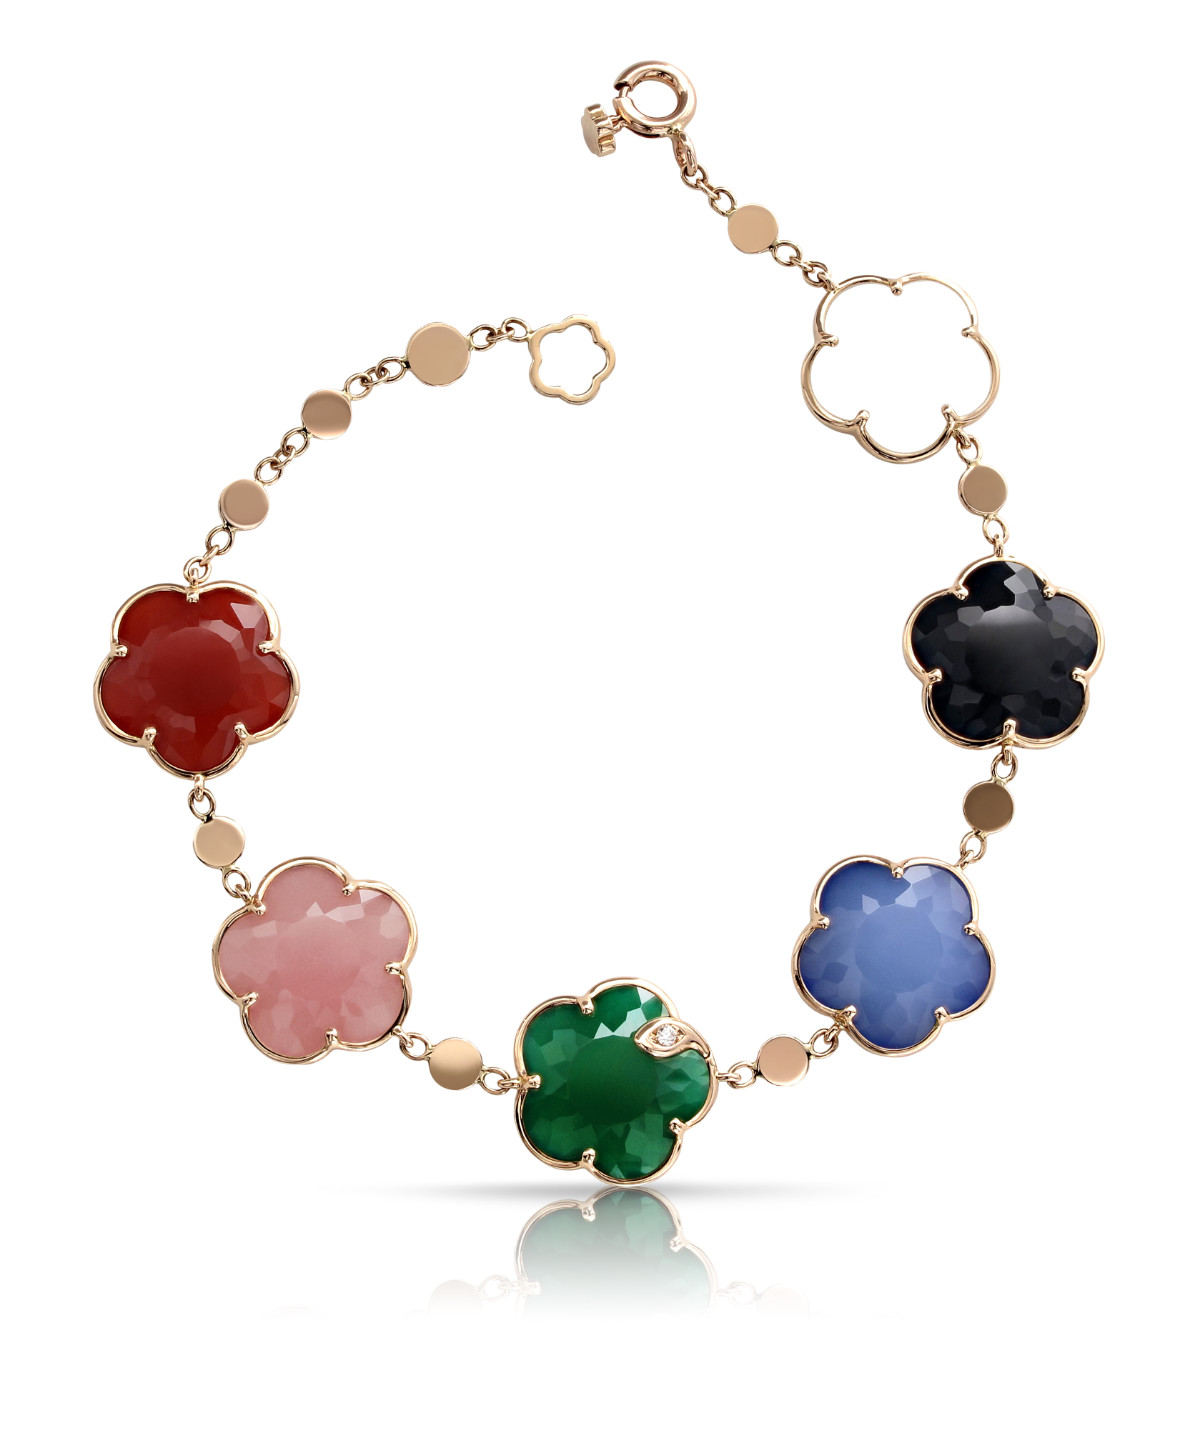 Pasquale Bruni Welcomes Summer Days With The New Petit Joli Bouquet Collection